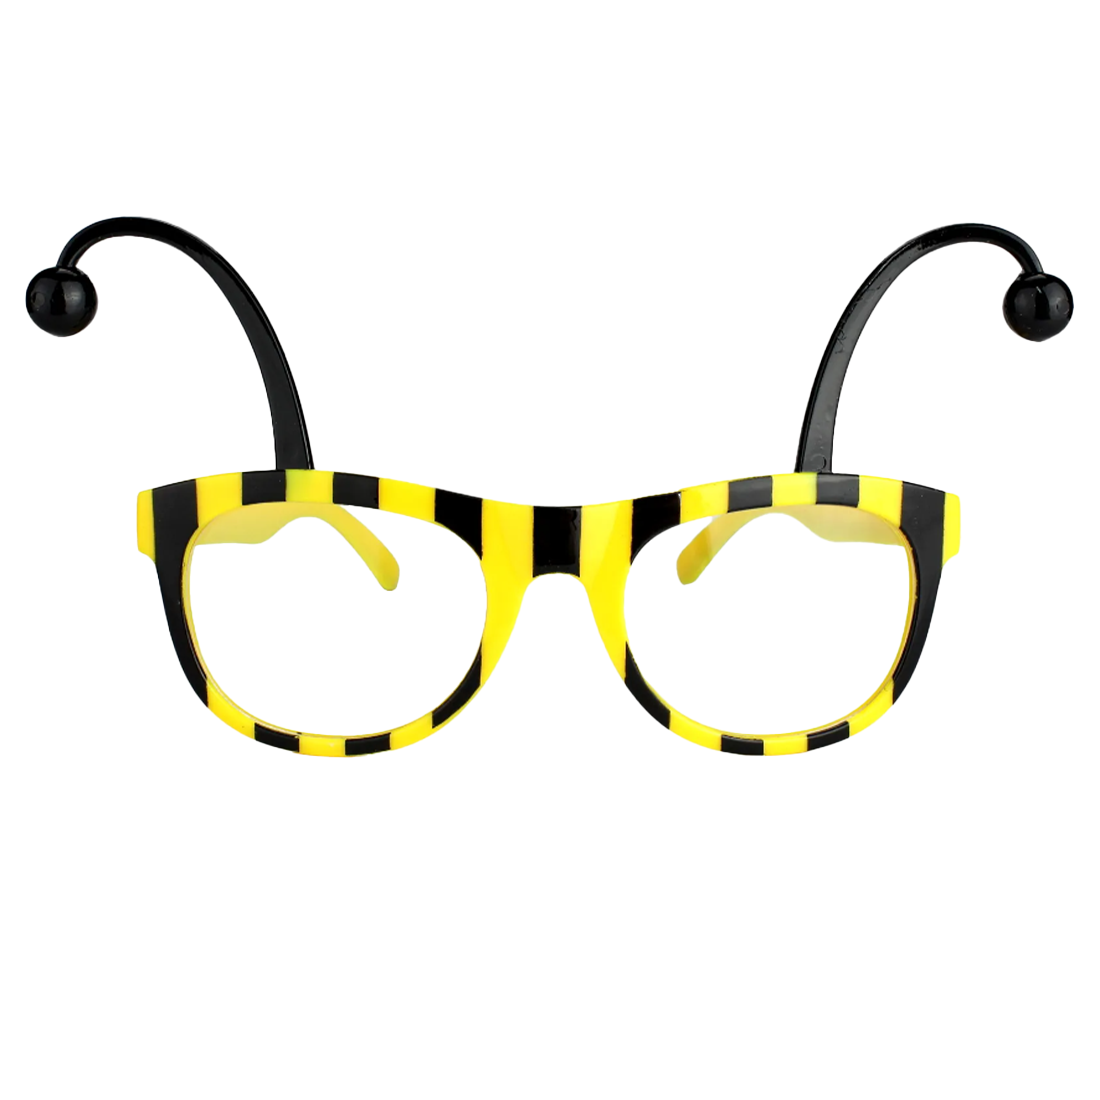 Bumble Bee Novelty Glasses